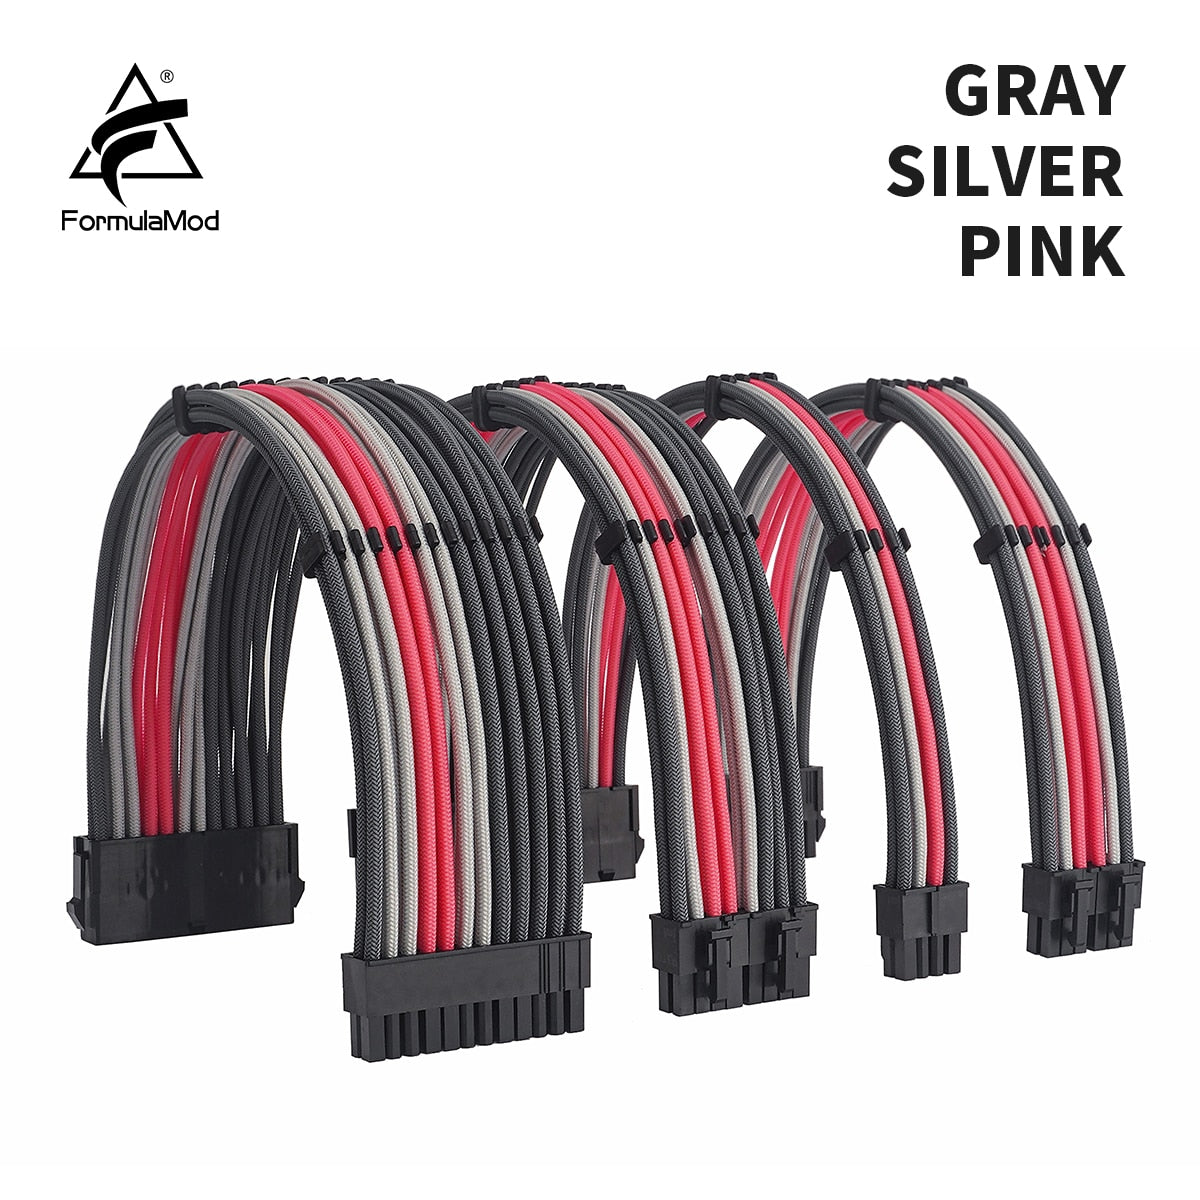 FormulaMod NCK3 Series PSU Extension Cable Kit , Solid Color Cable Mix Combo 300mm ATX24Pin PCI-E8Pin CPU8Pin With Combs